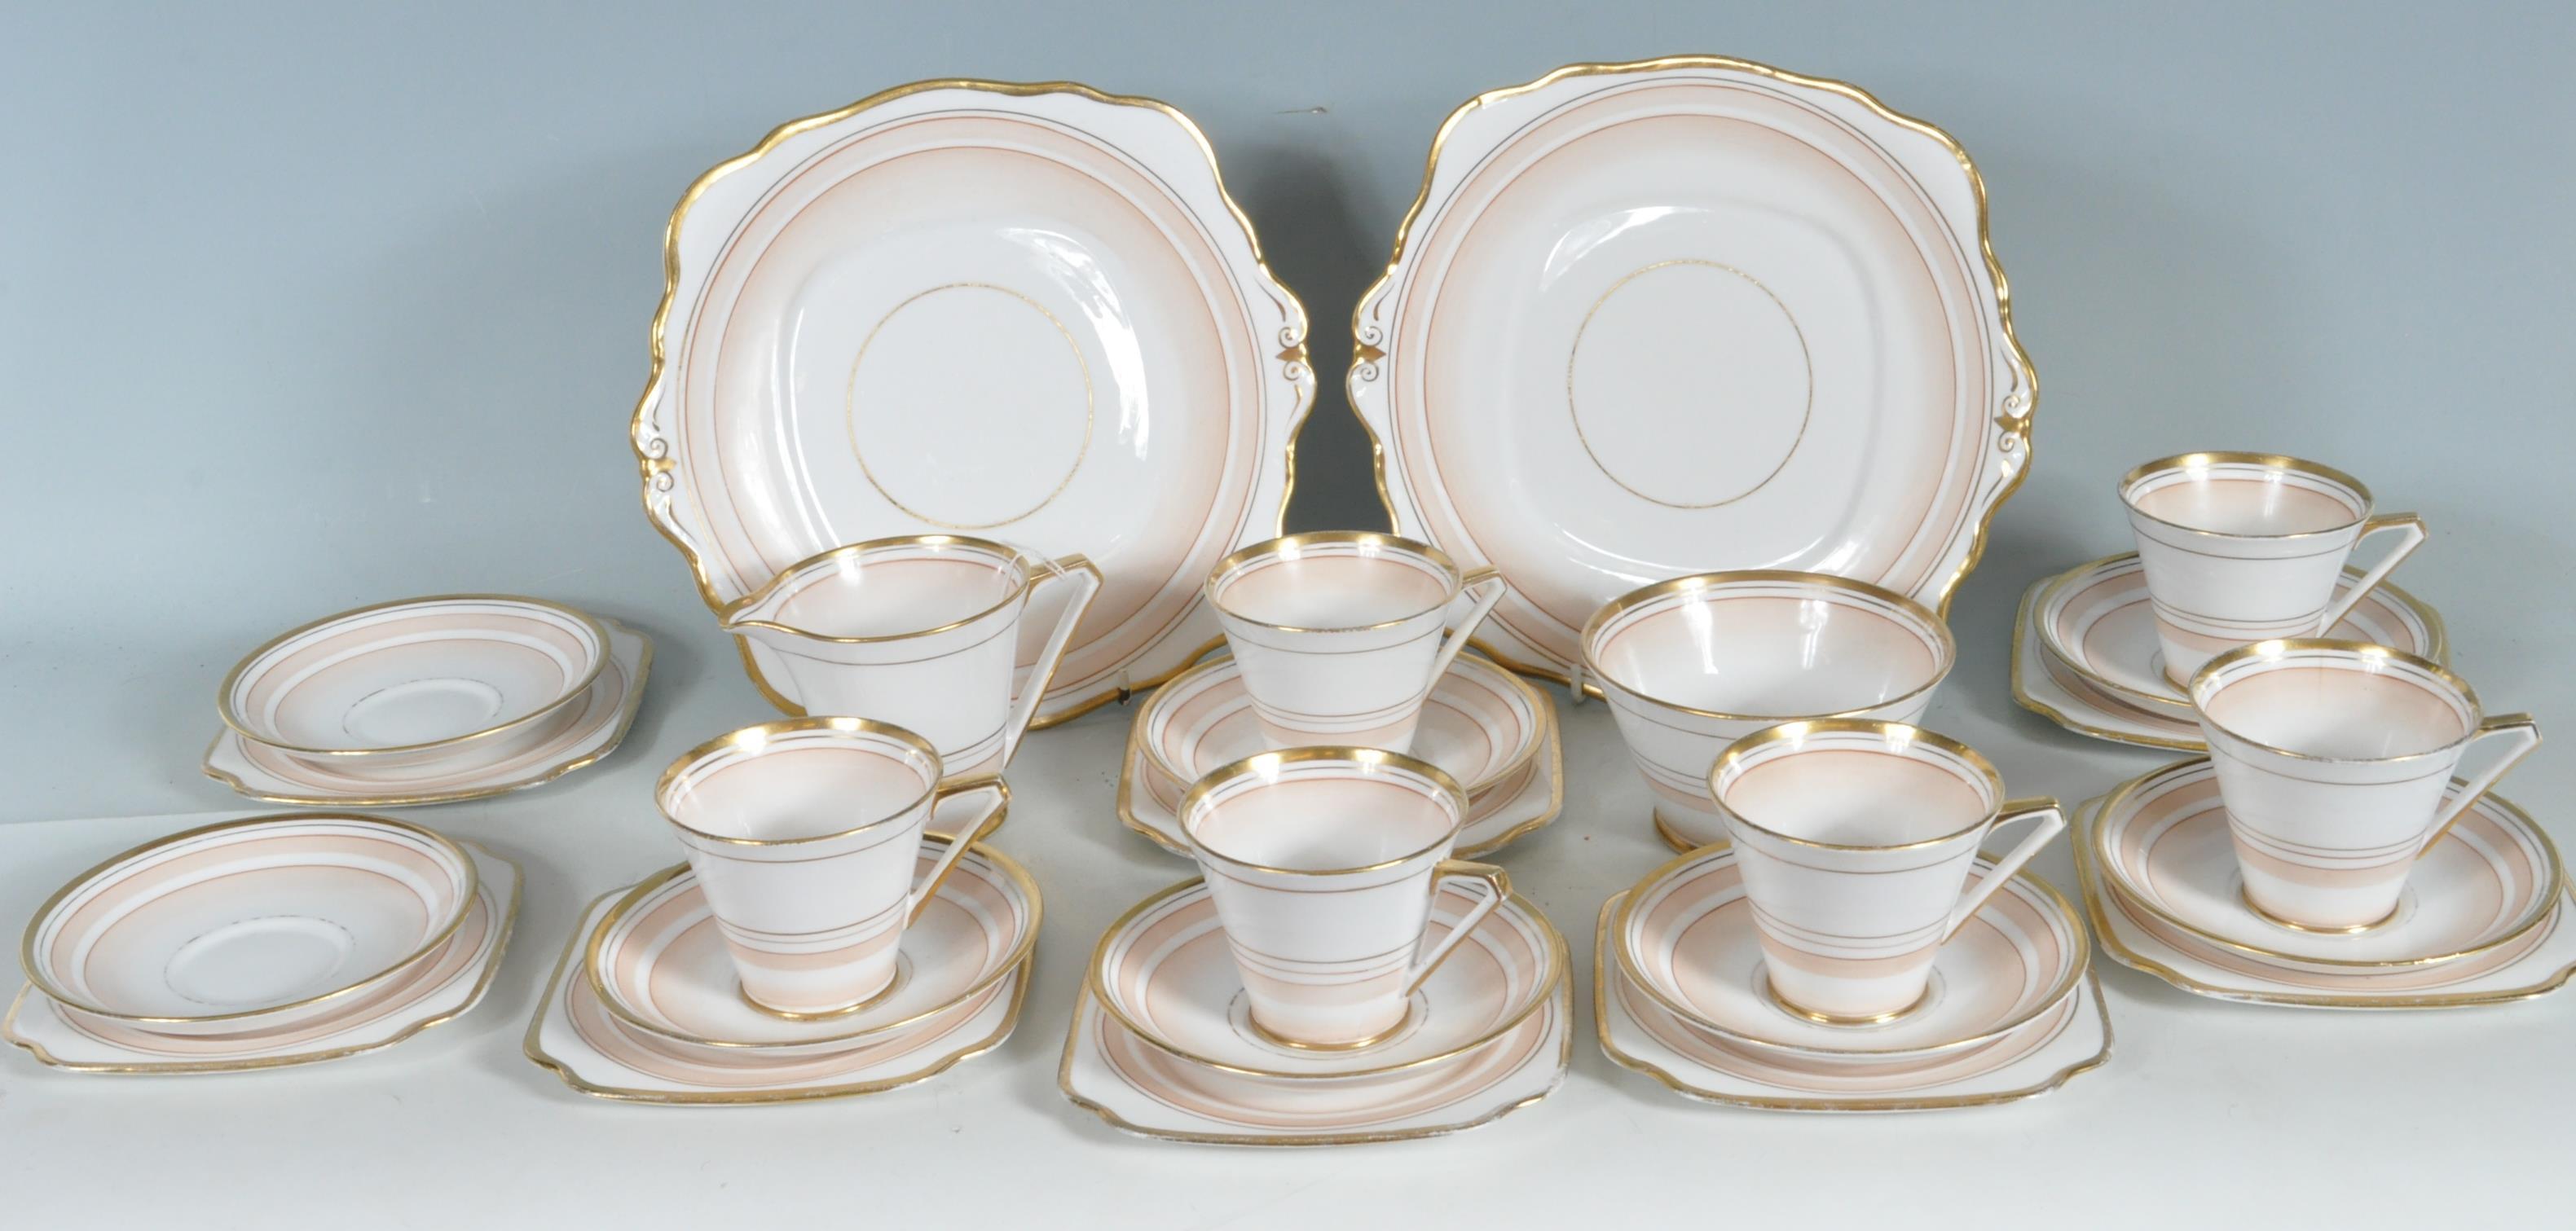 BELL CHINA MADE IN ENGLAND TEA SET